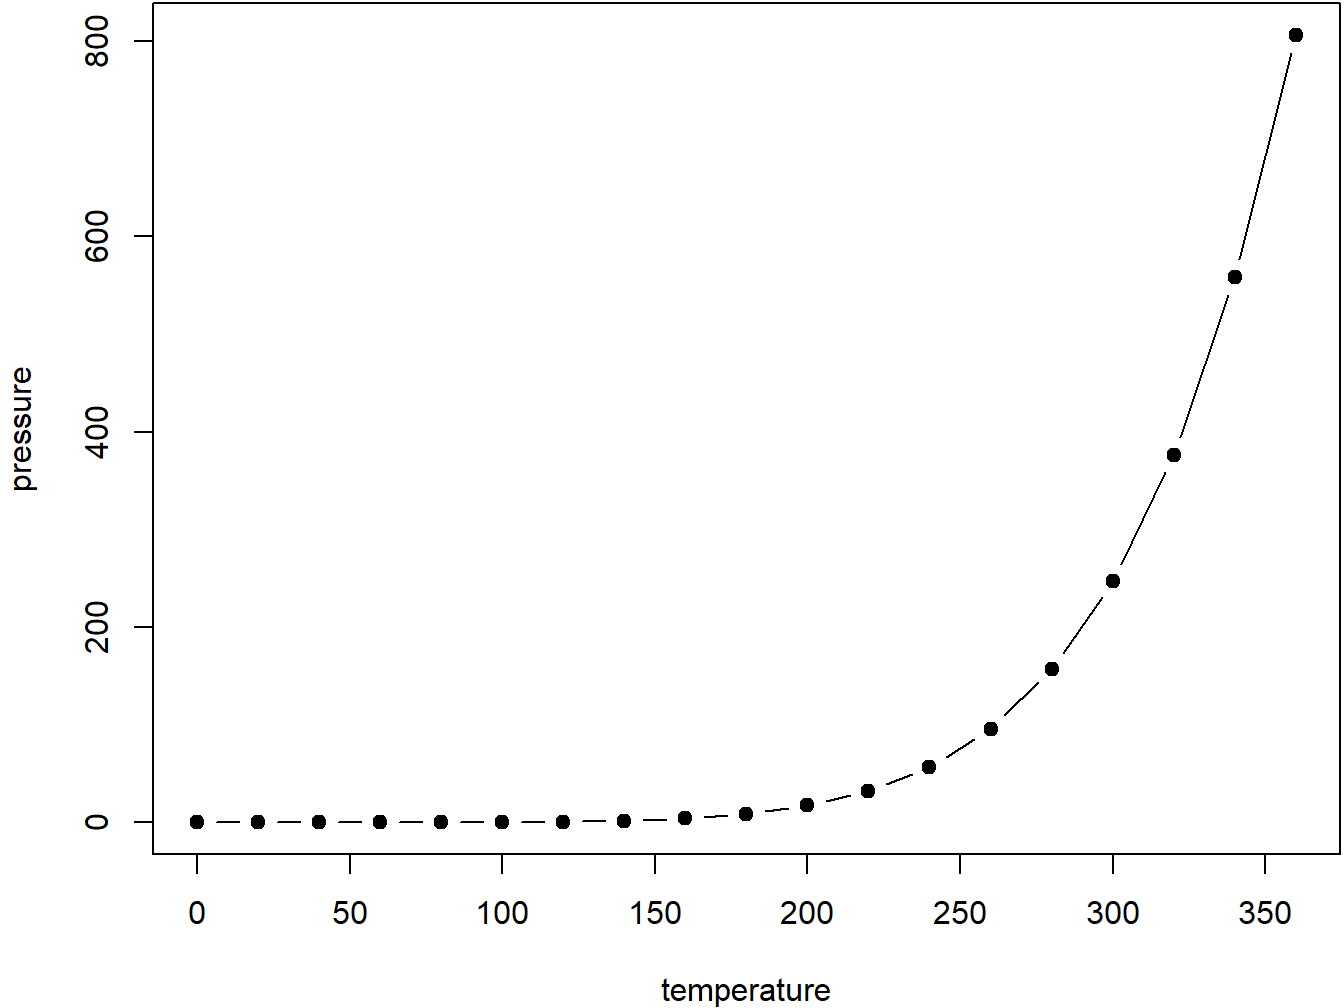 Plot with connected points showing that vapor pressure of mercury increases exponentially as temperature increases.